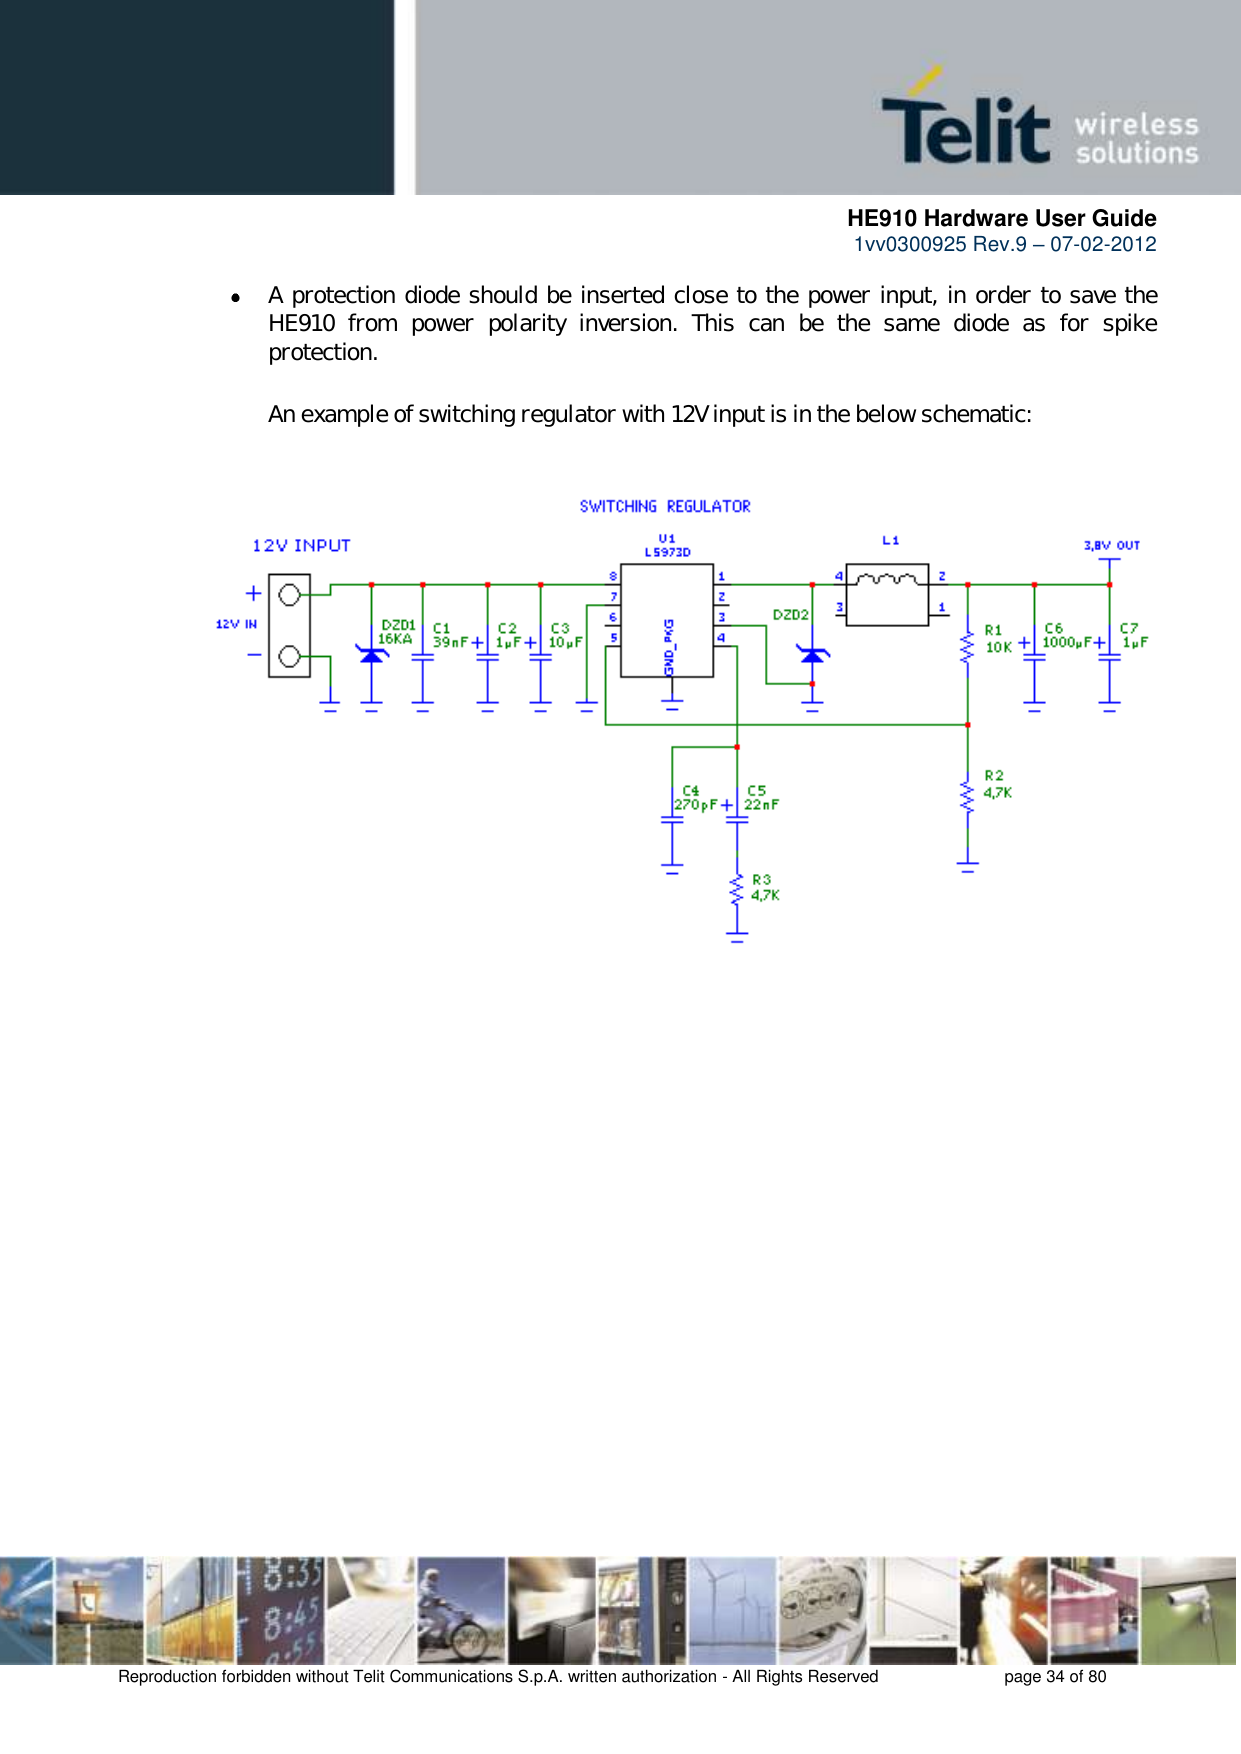      HE910 Hardware User Guide 1vv0300925 Rev.9 – 07-02-2012    Reproduction forbidden without Telit Communications S.p.A. written authorization - All Rights Reserved    page 34 of 80   A protection diode should be inserted close to the power input, in order to save the HE910  from  power  polarity  inversion.  This  can  be  the  same  diode  as  for  spike protection.  An example of switching regulator with 12V input is in the below schematic:     